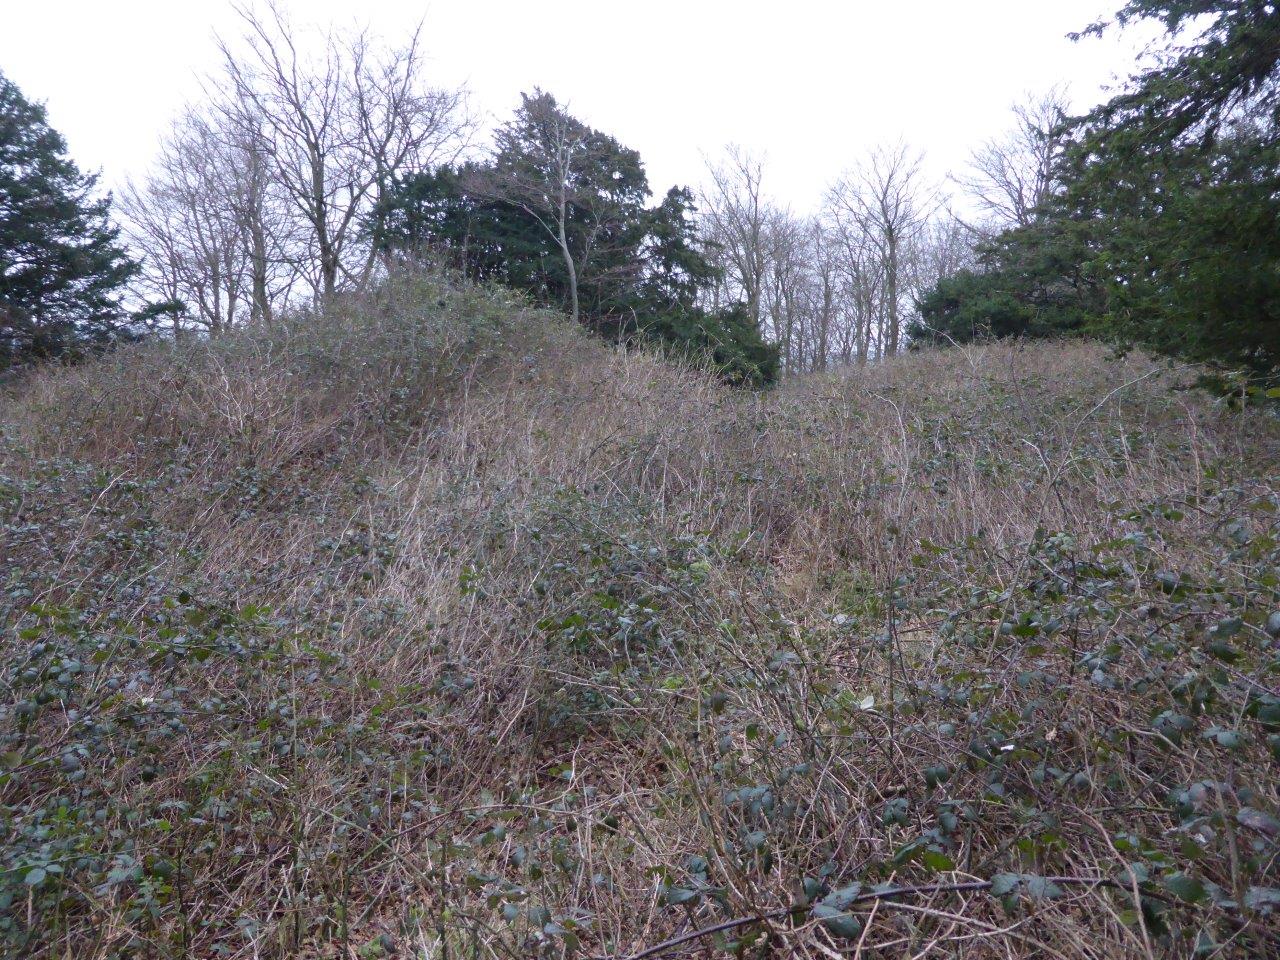 This image shows the twin mounds. It is quite overgrown with brambles but they do help protect this unique monument